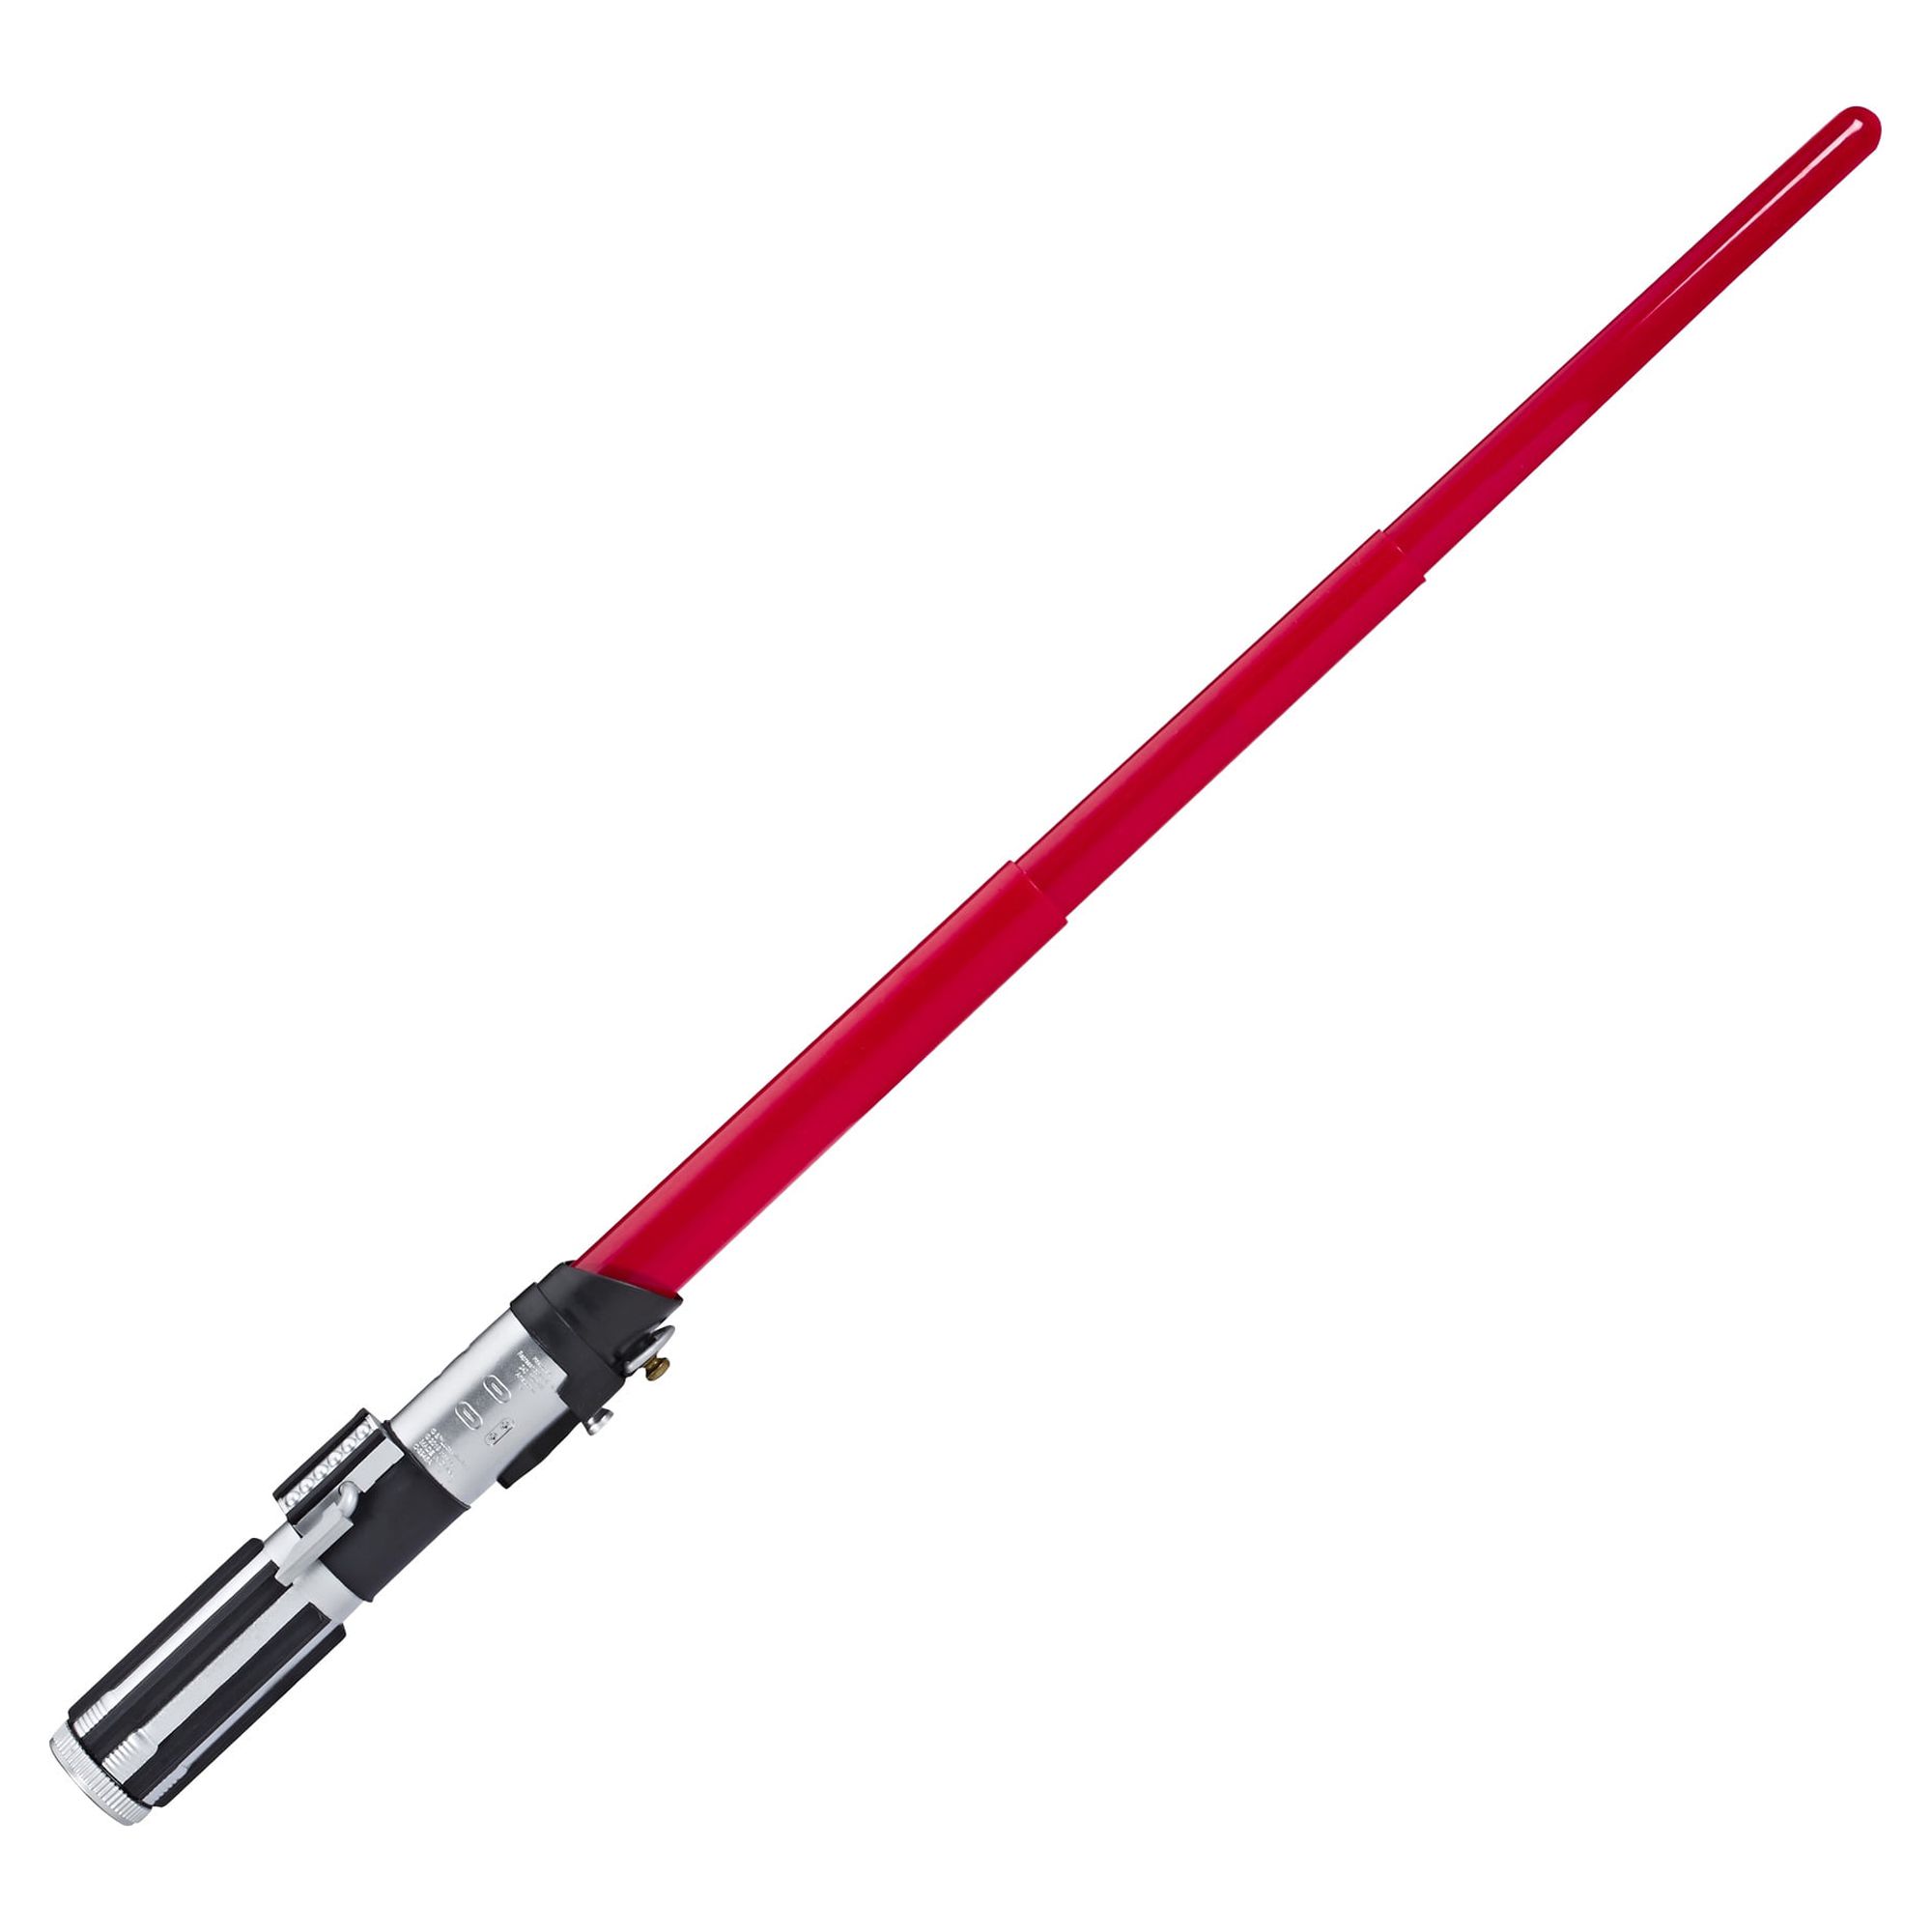 Star Wars Darth Vader Electronic Red Lightsaber Toy Ages 6 and Up Action Figure Accessory - image 1 of 13